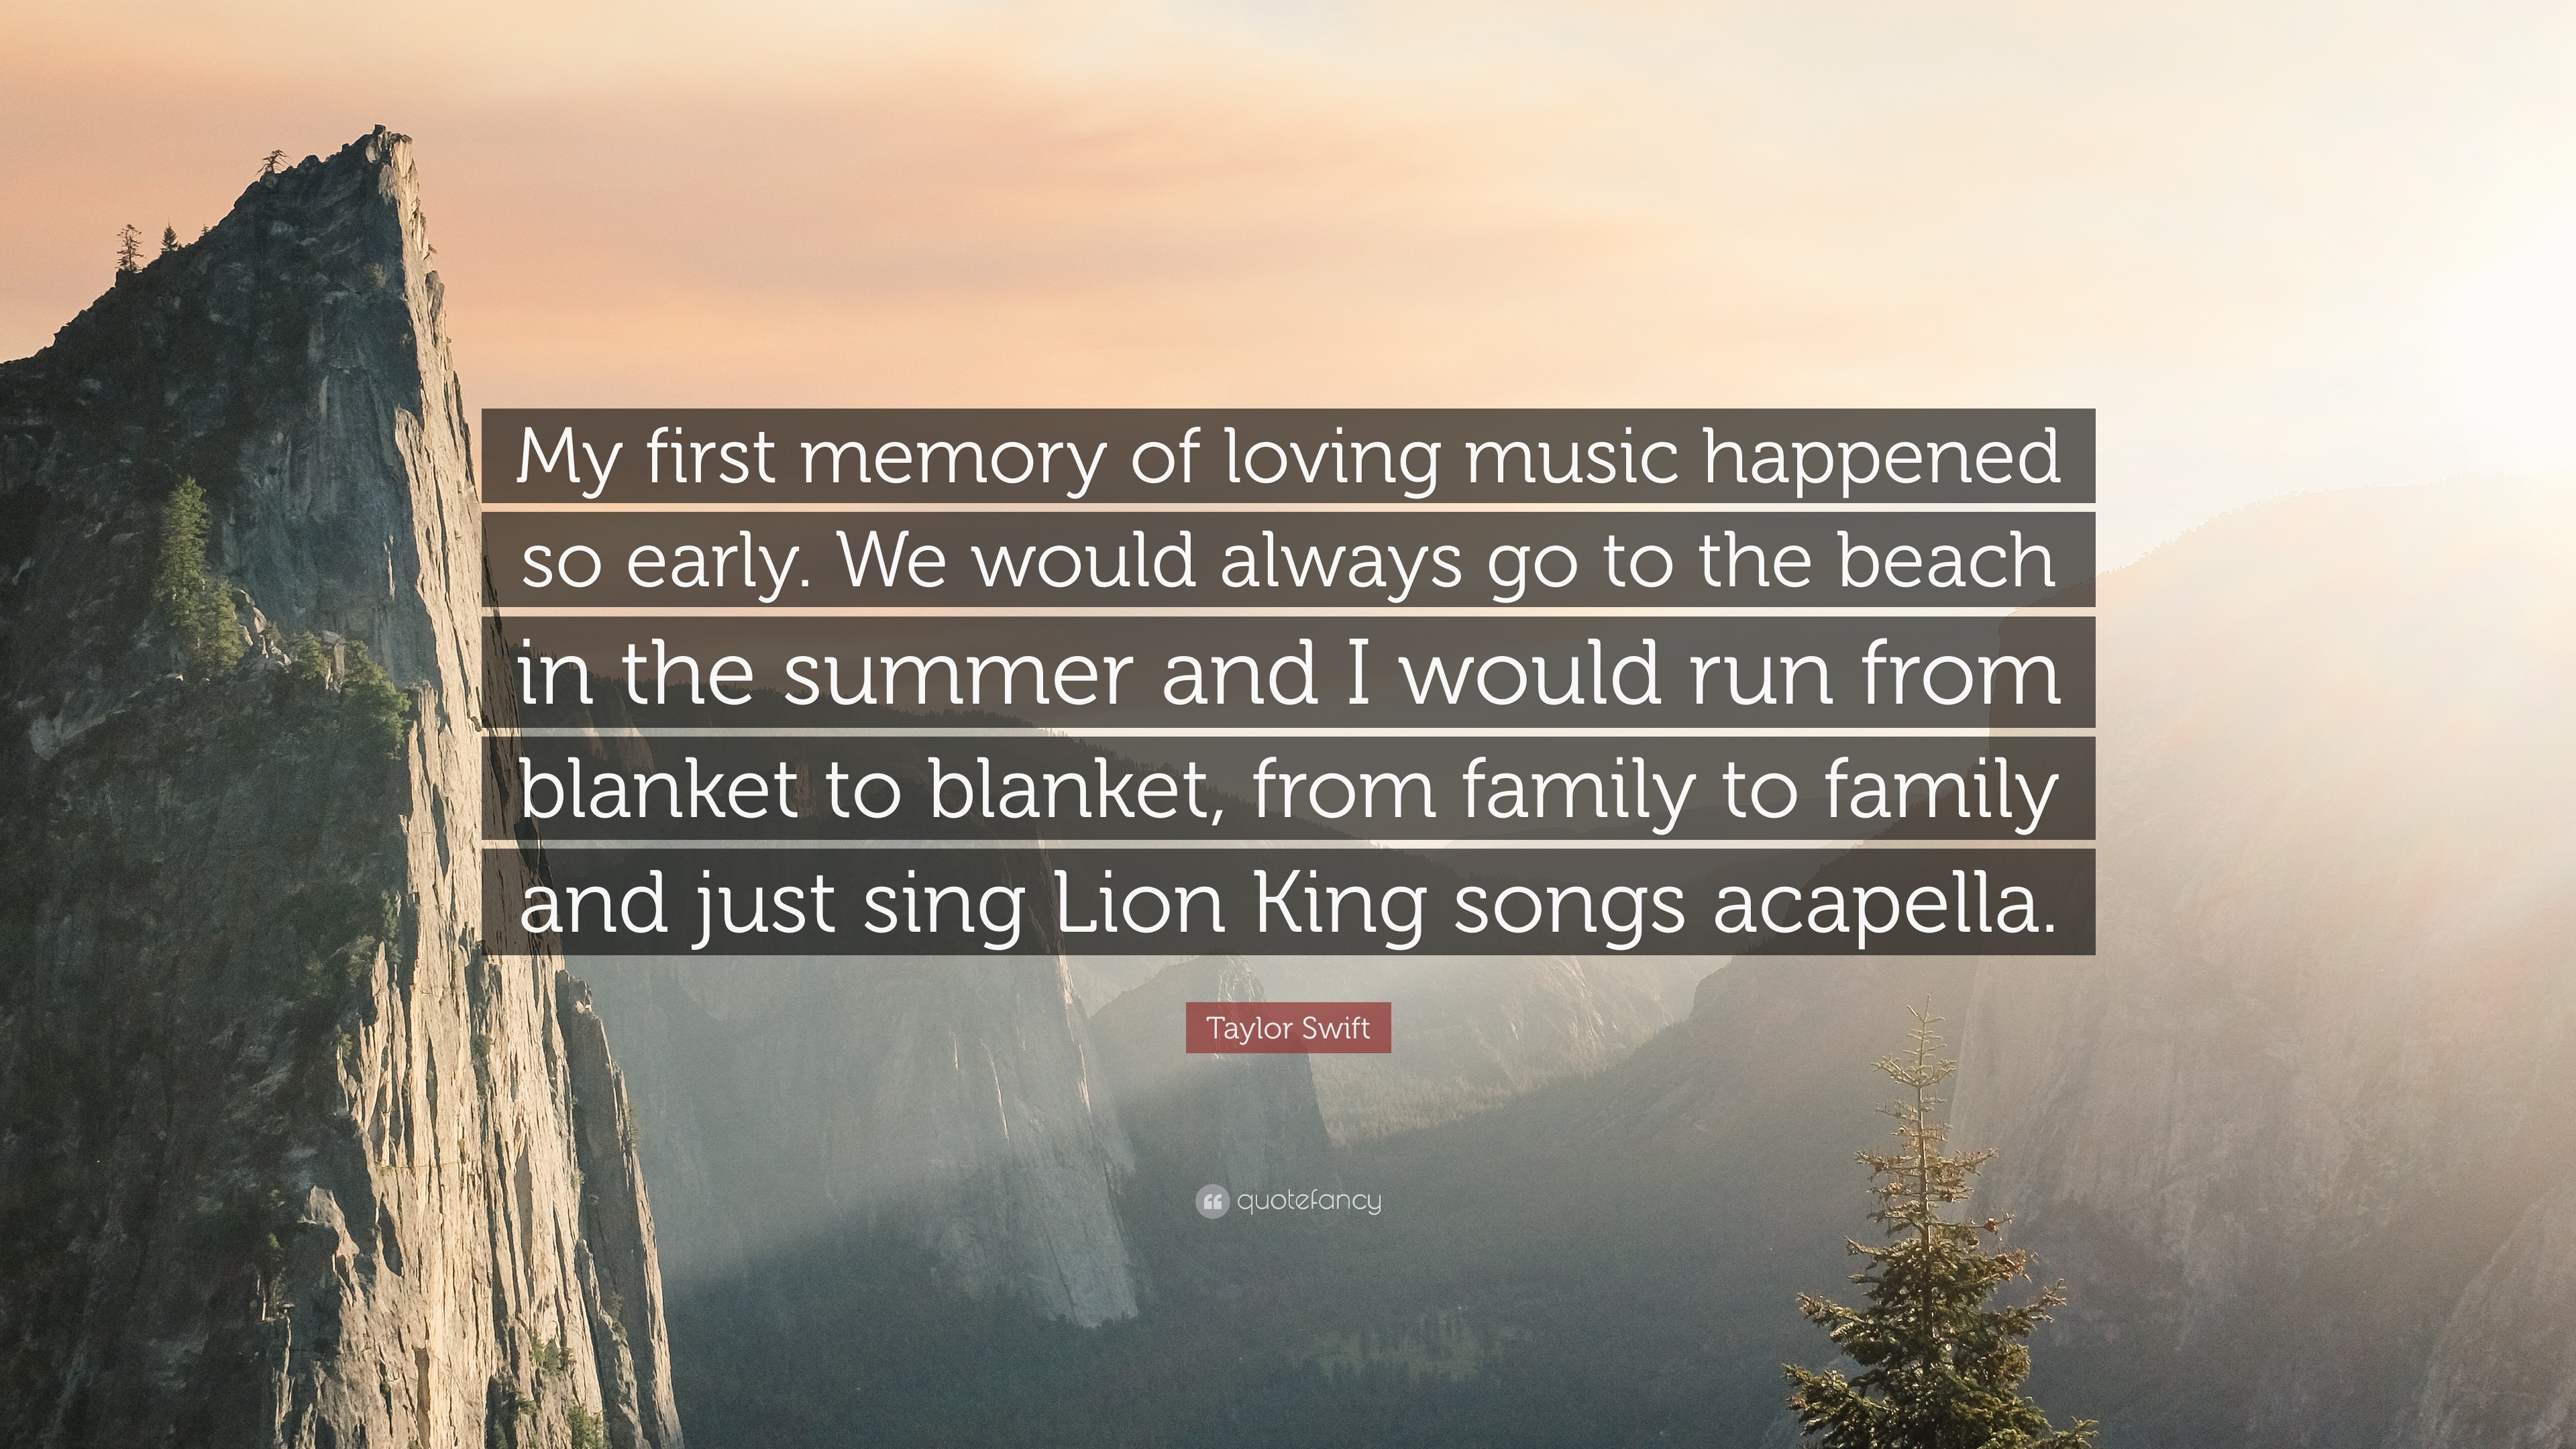 3840x2160 Taylor Swift Quote: “My first memory of loving music happened so early. We